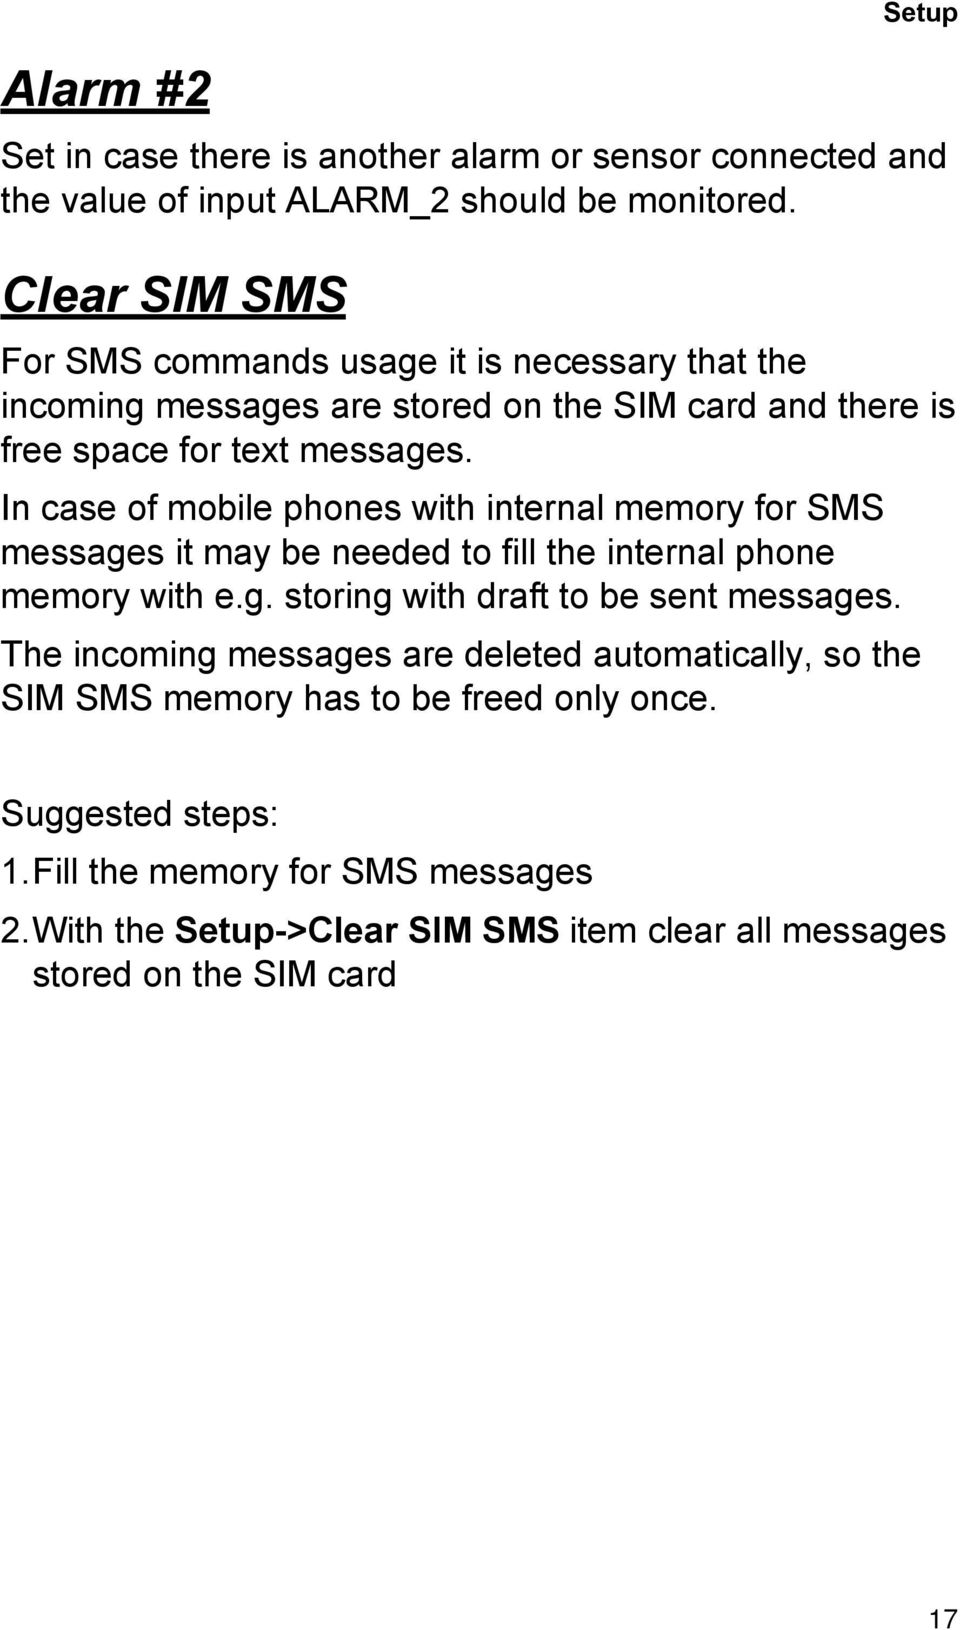 In case of mobile phones with internal memory for SMS messages it may be needed to fill the internal phone memory with e.g. storing with draft to be sent messages.